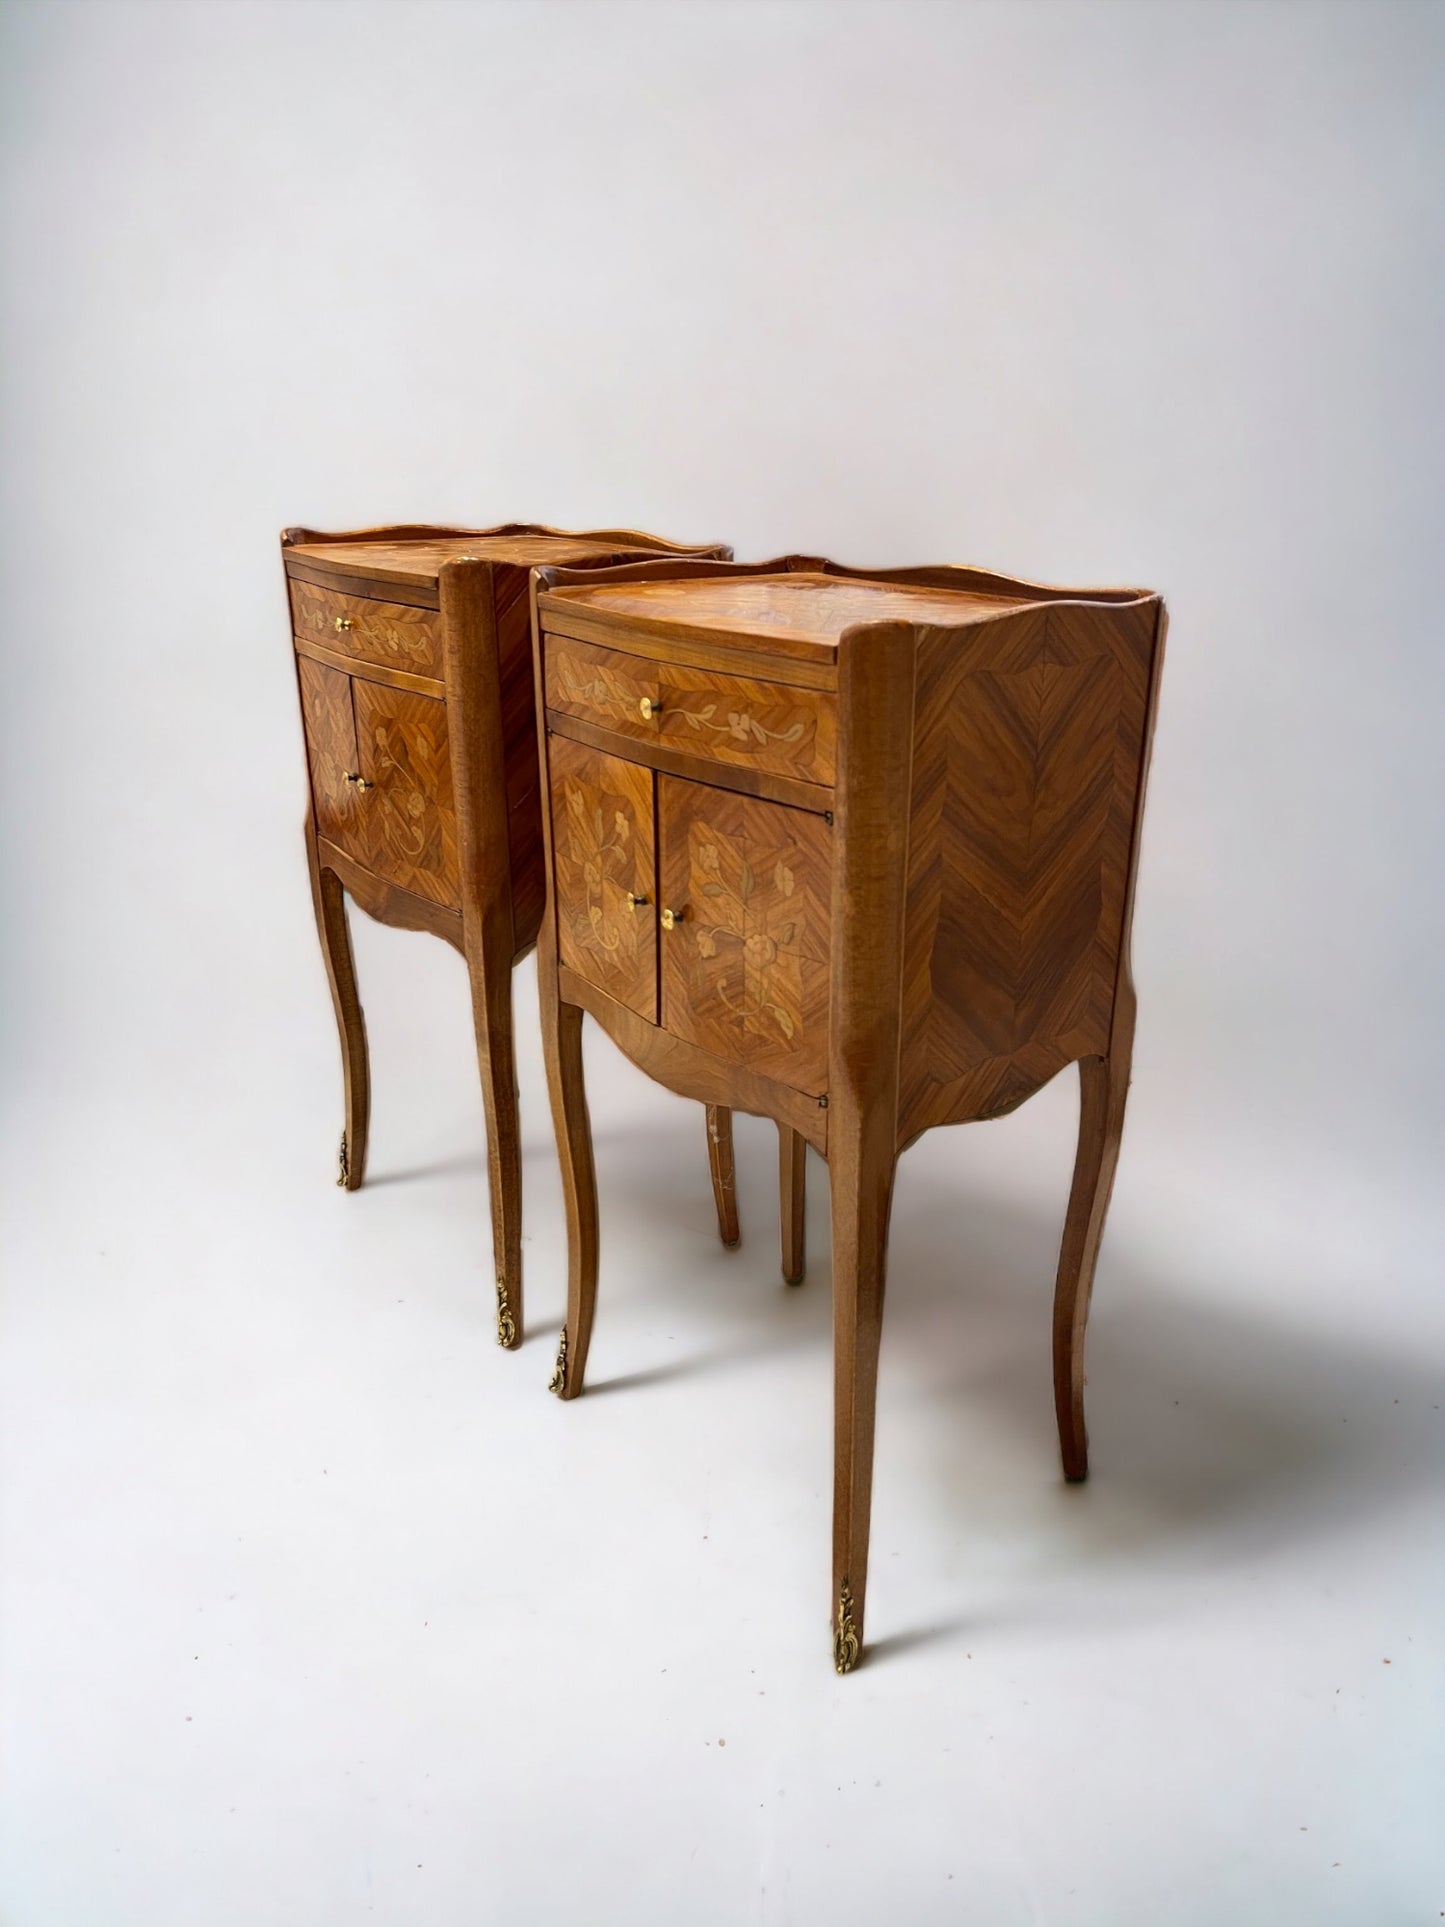 Pair of Marquetry Cabinets, c. 1930s